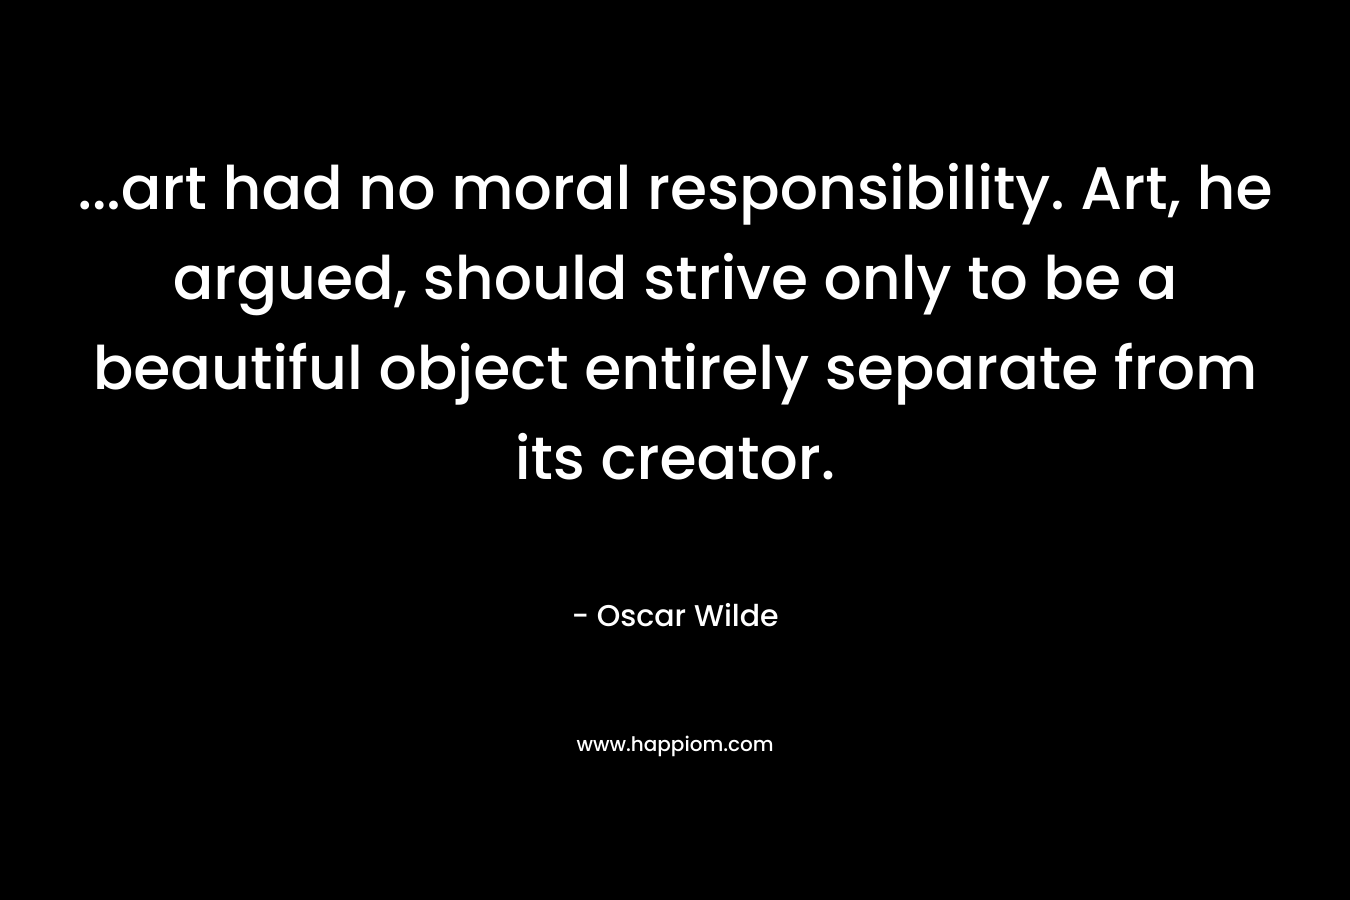 …art had no moral responsibility. Art, he argued, should strive only to be a beautiful object entirely separate from its creator. – Oscar Wilde